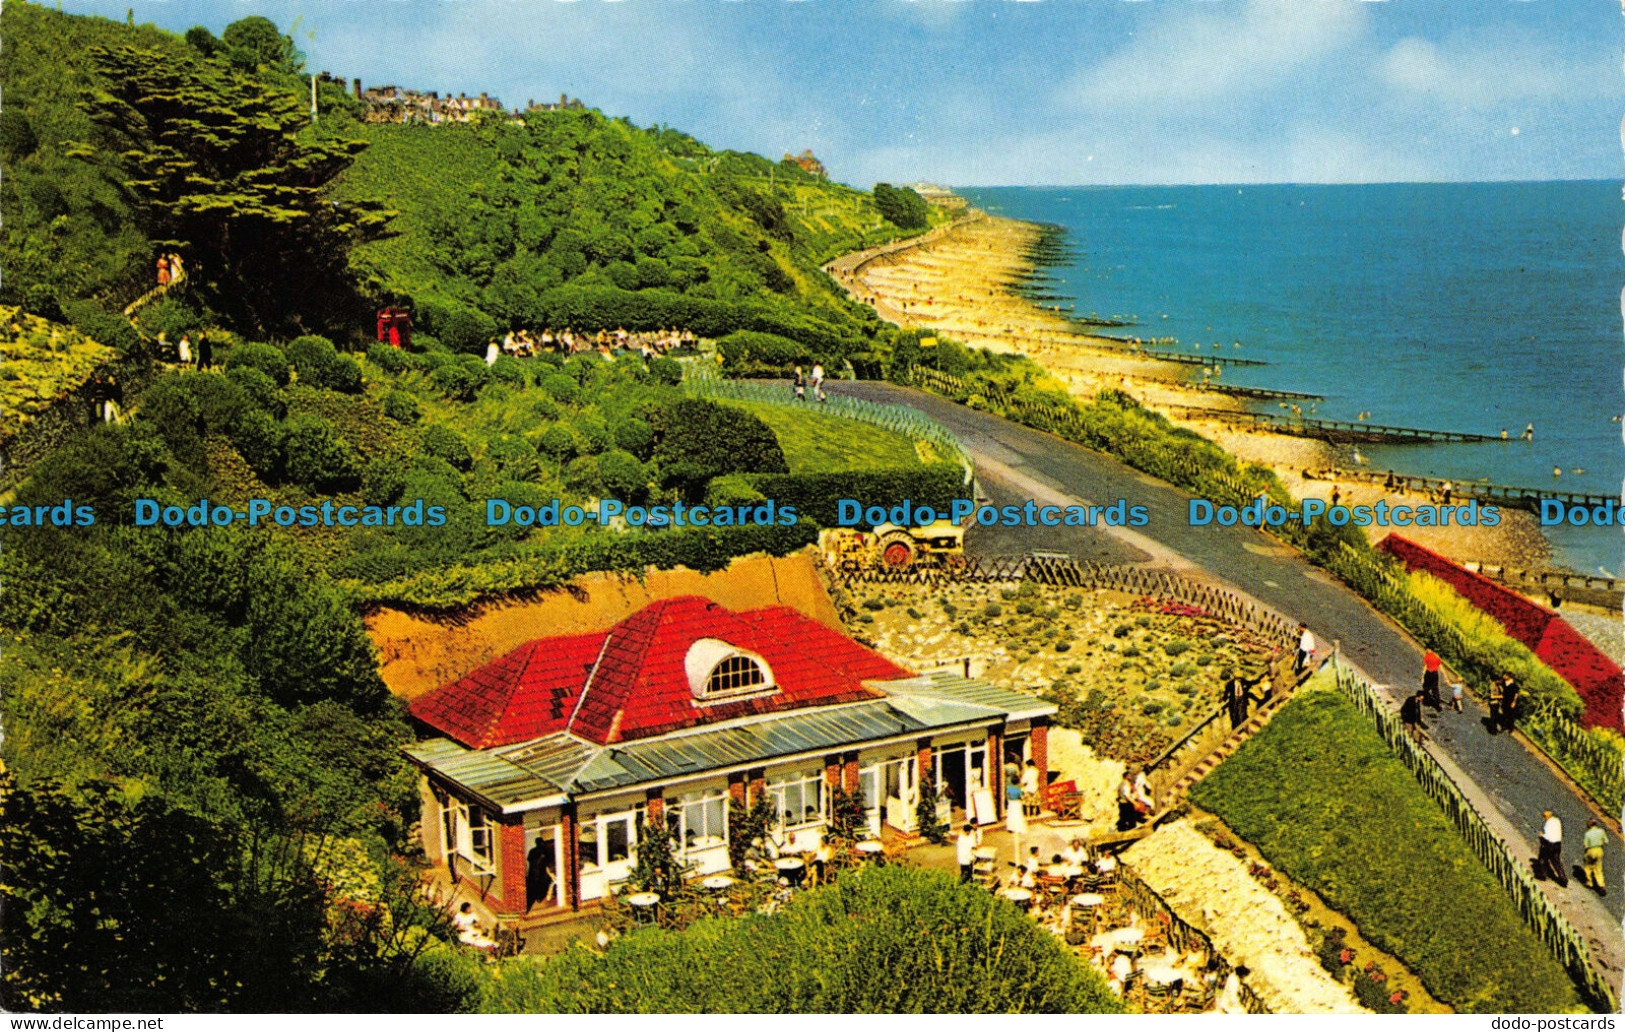 R082364 Eastbourne. Holywell Gardens And Tea Chalet - World